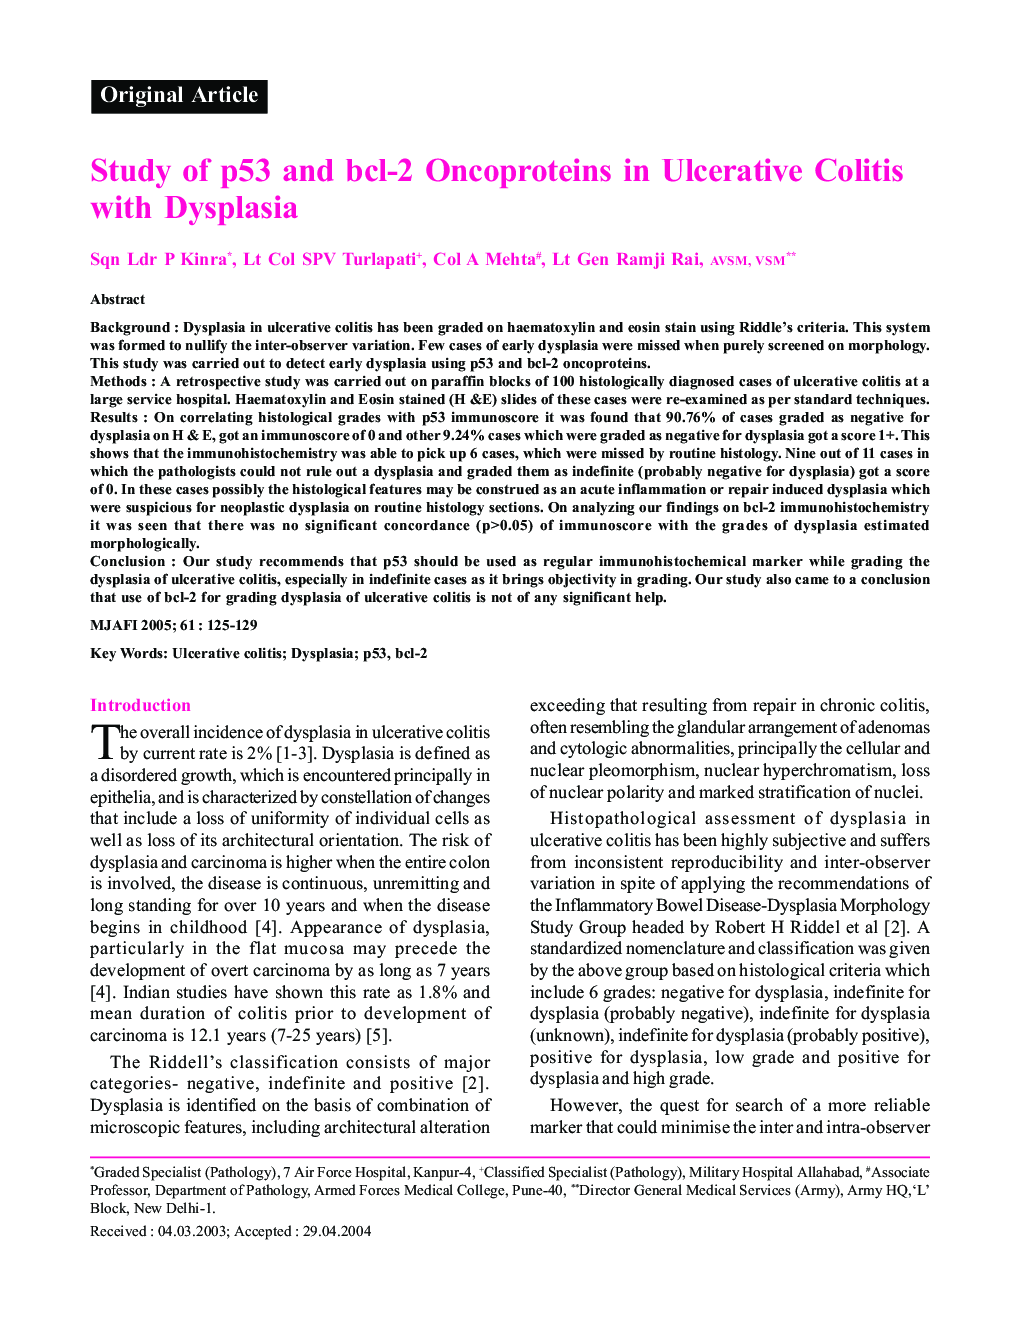 Study of p53 and bcl-2 Oncoproteins in Ulcerative Colitis with Dysplasia